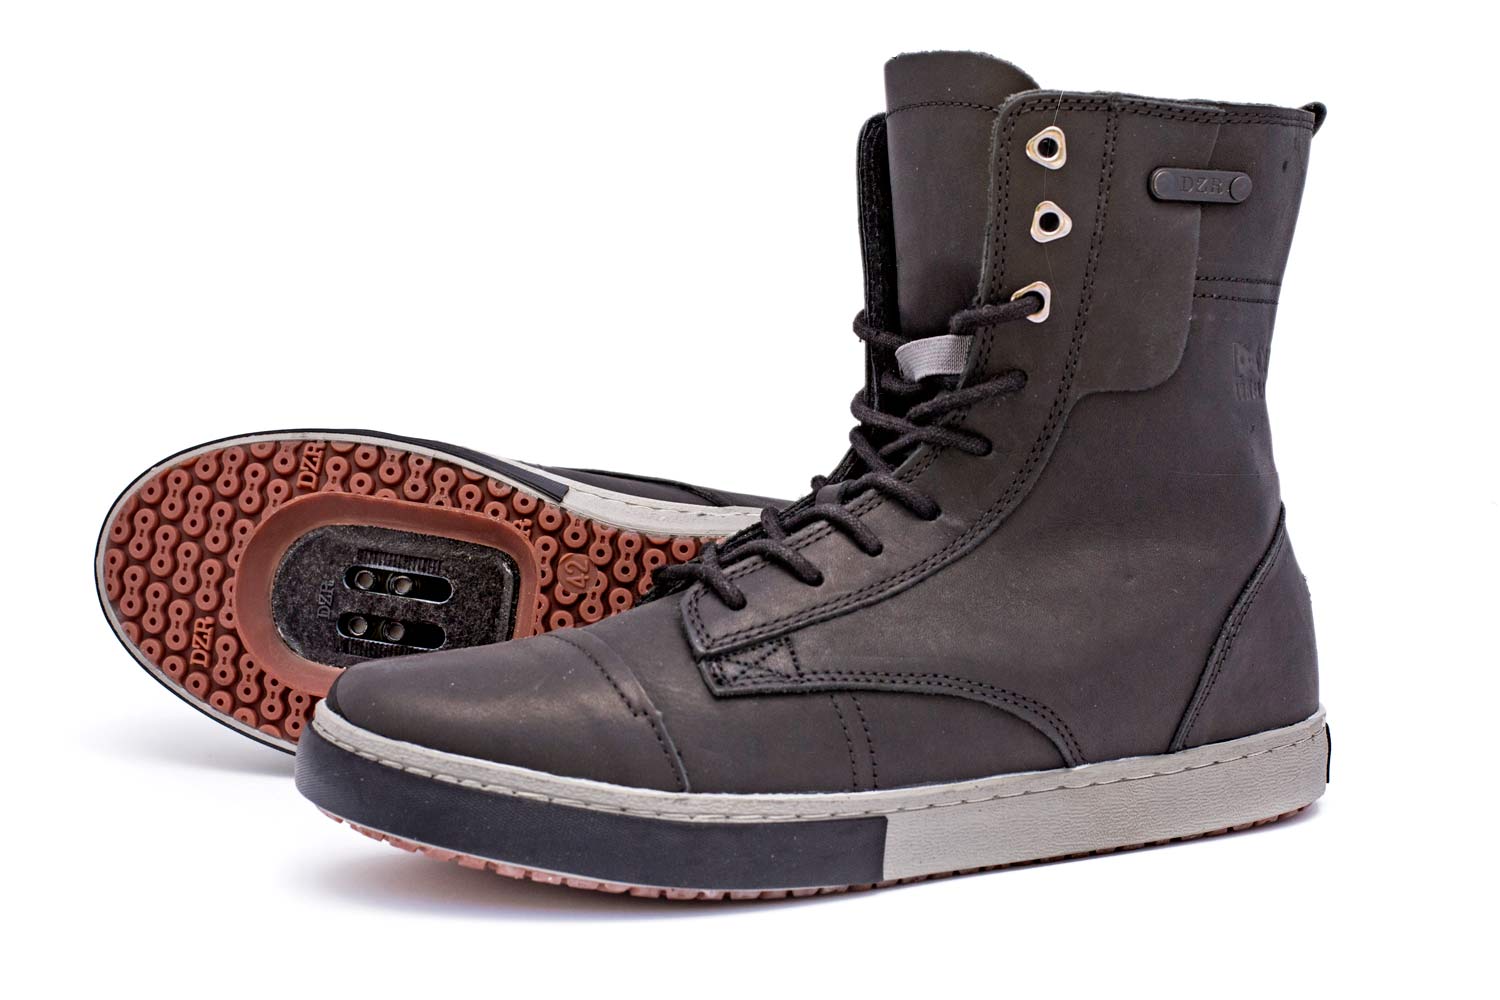 DZR Turin moto leather lace-up cycling boots